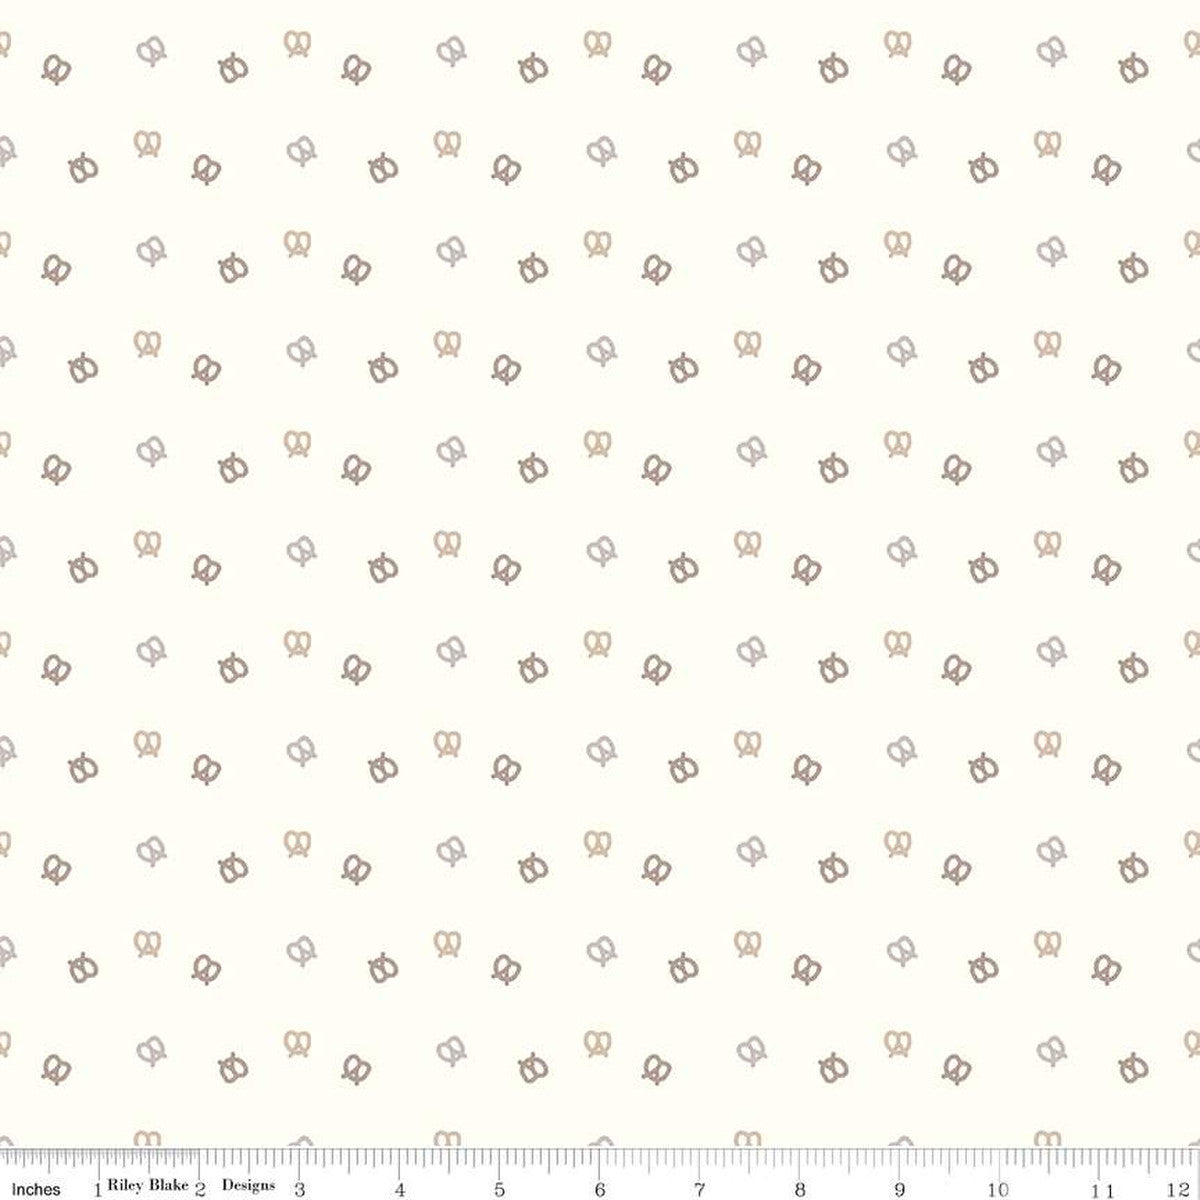 Hush Hush 2 Pretzel Party by Christopher Thompson for Riley Blake Designs cream background with scattered tiny pretzels in light gray and brown low volume background cotton fabric quilt weight for quilting garments clothing bags sewing projects 